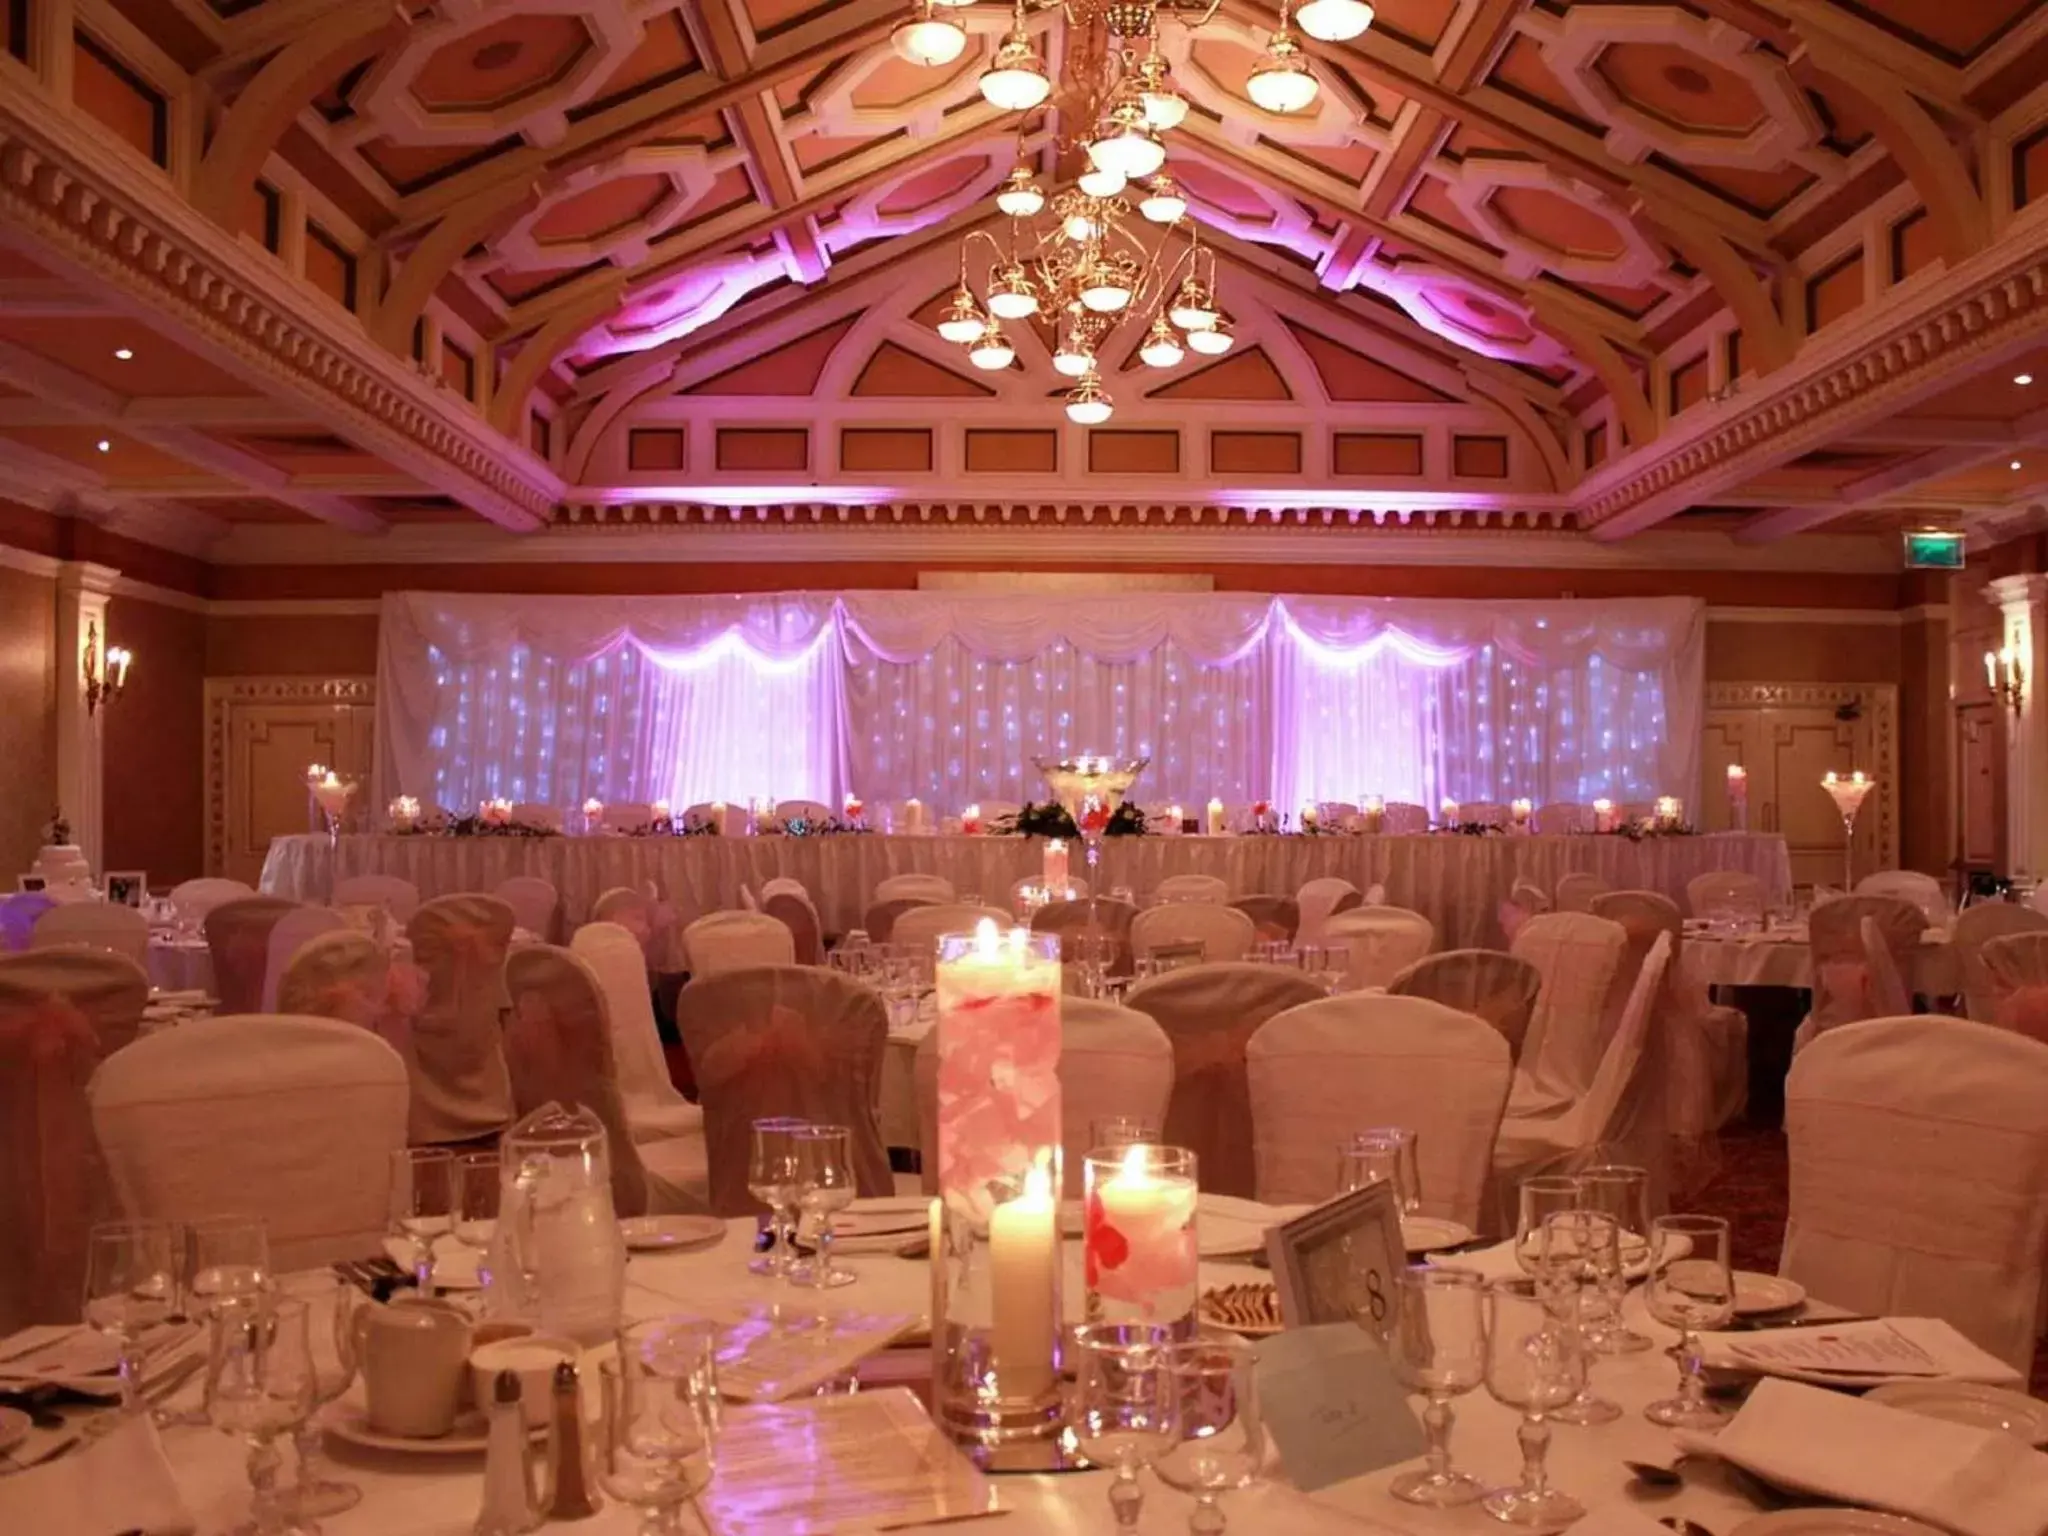 Banquet/Function facilities, Banquet Facilities in Lady Gregory Hotel, Leisure Club & Beauty Rooms